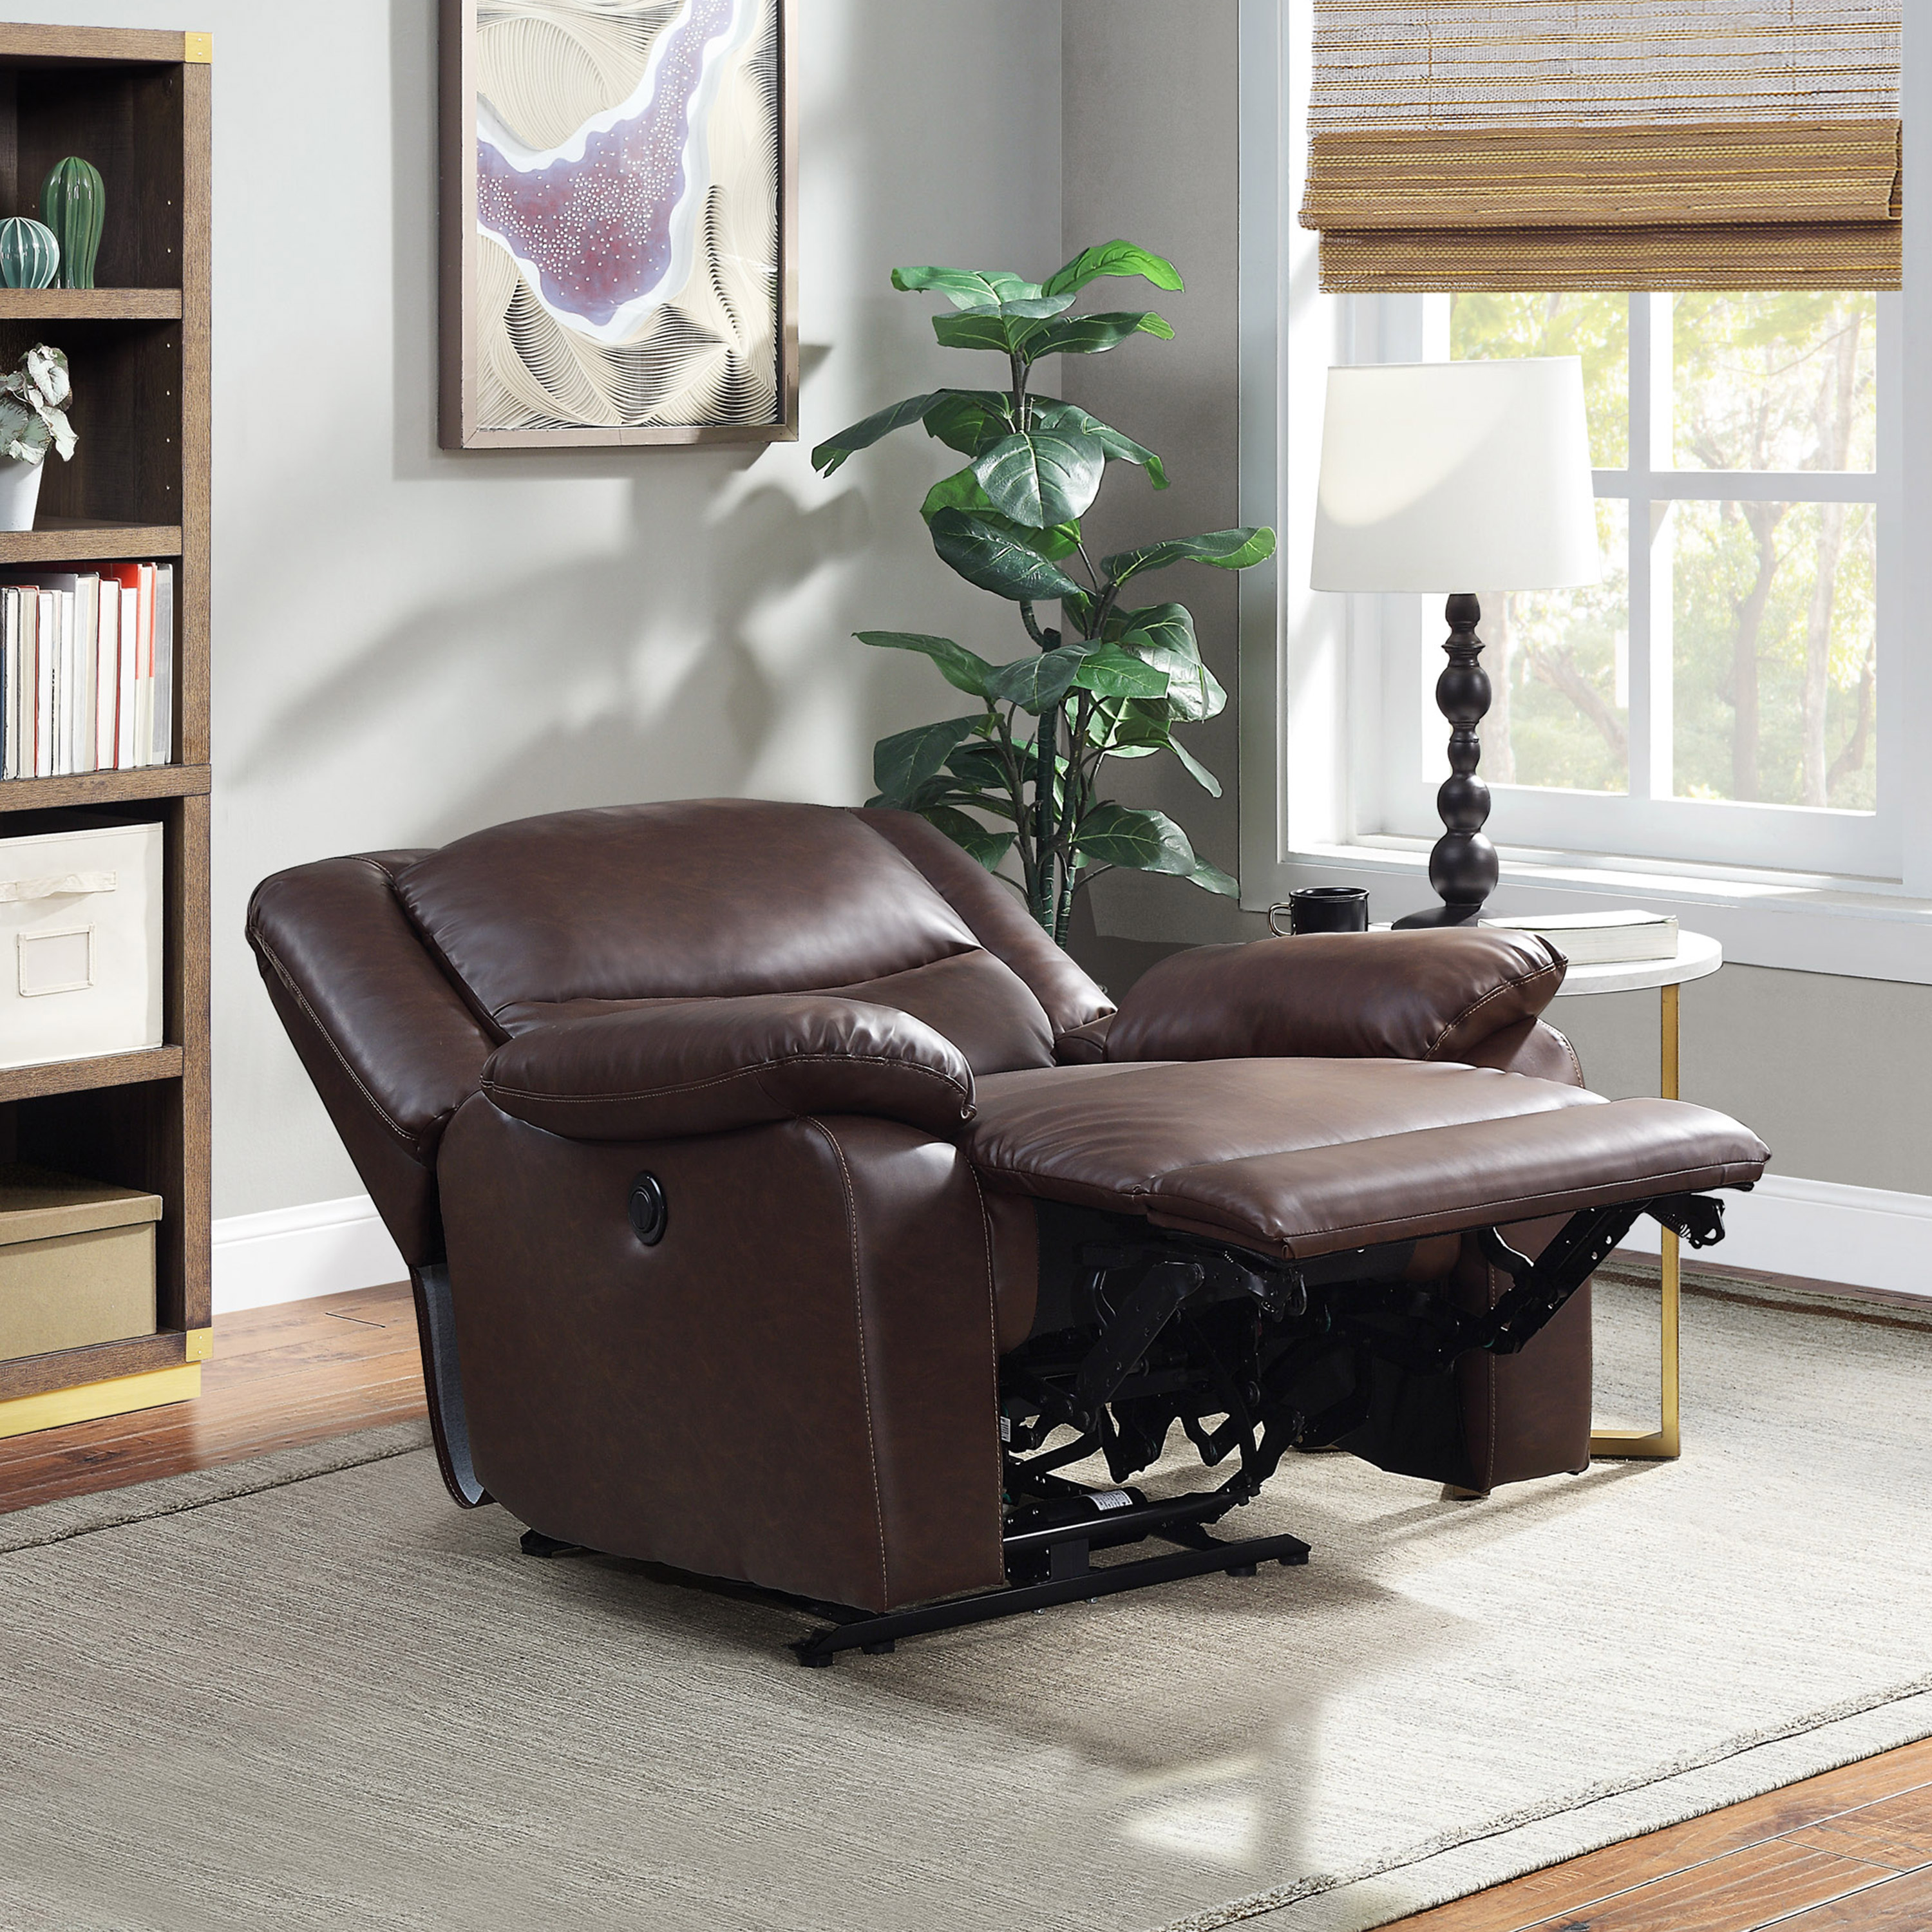 Serta Push-Button Power Recliner with Deep Body Cushions, Brown Faux Leather Upholstery - image 2 of 9